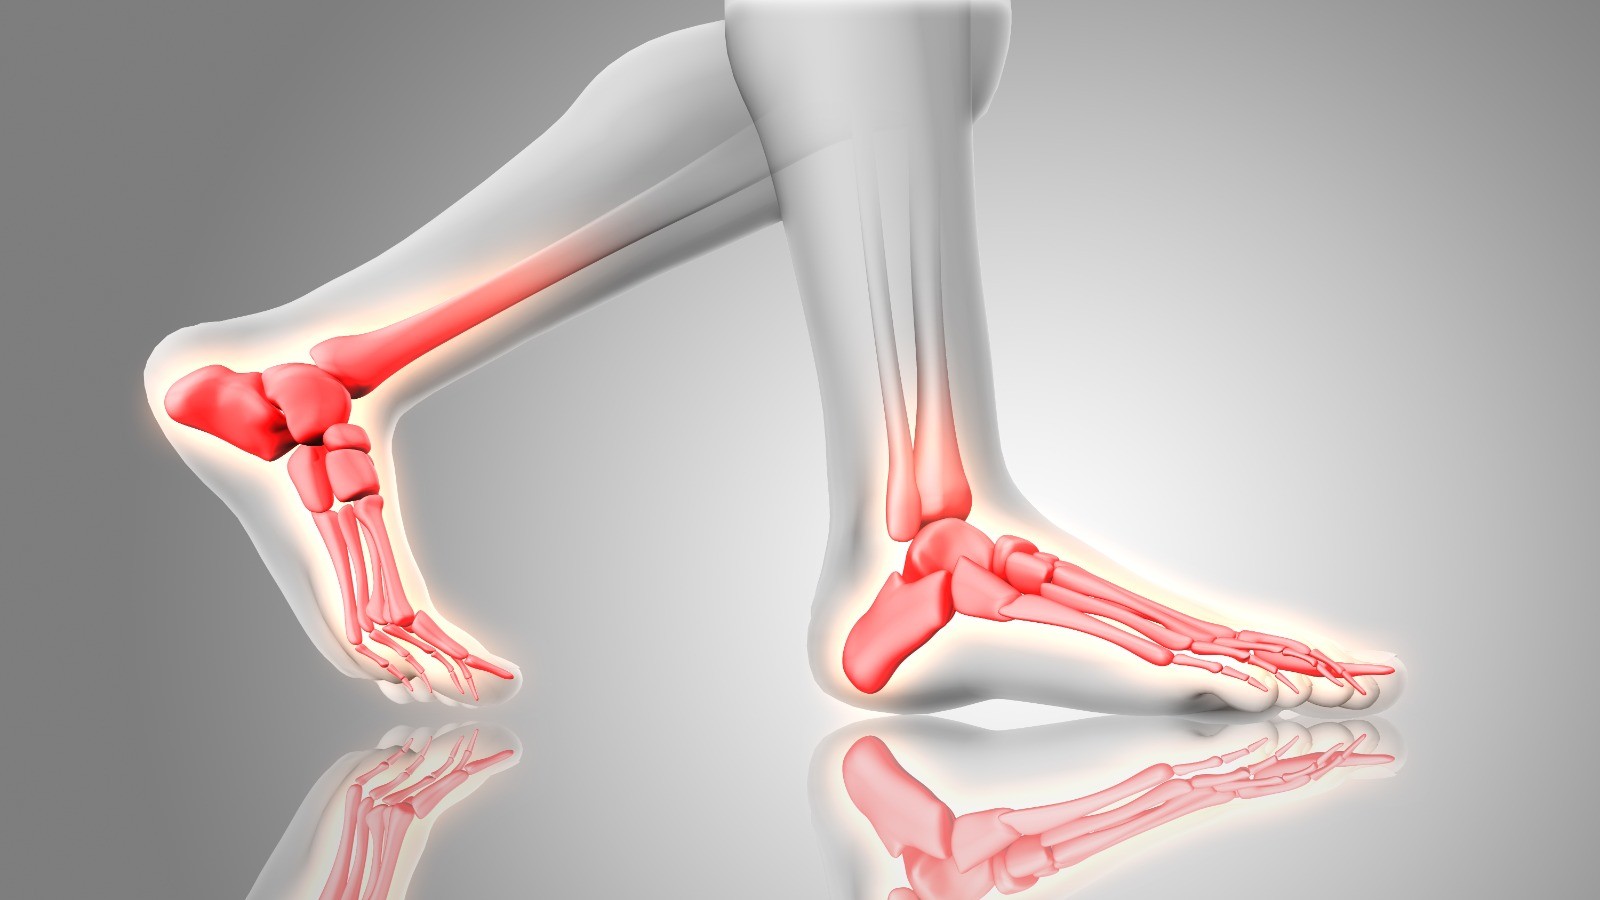 What is the Connection Between Heel Pain and Cancer?